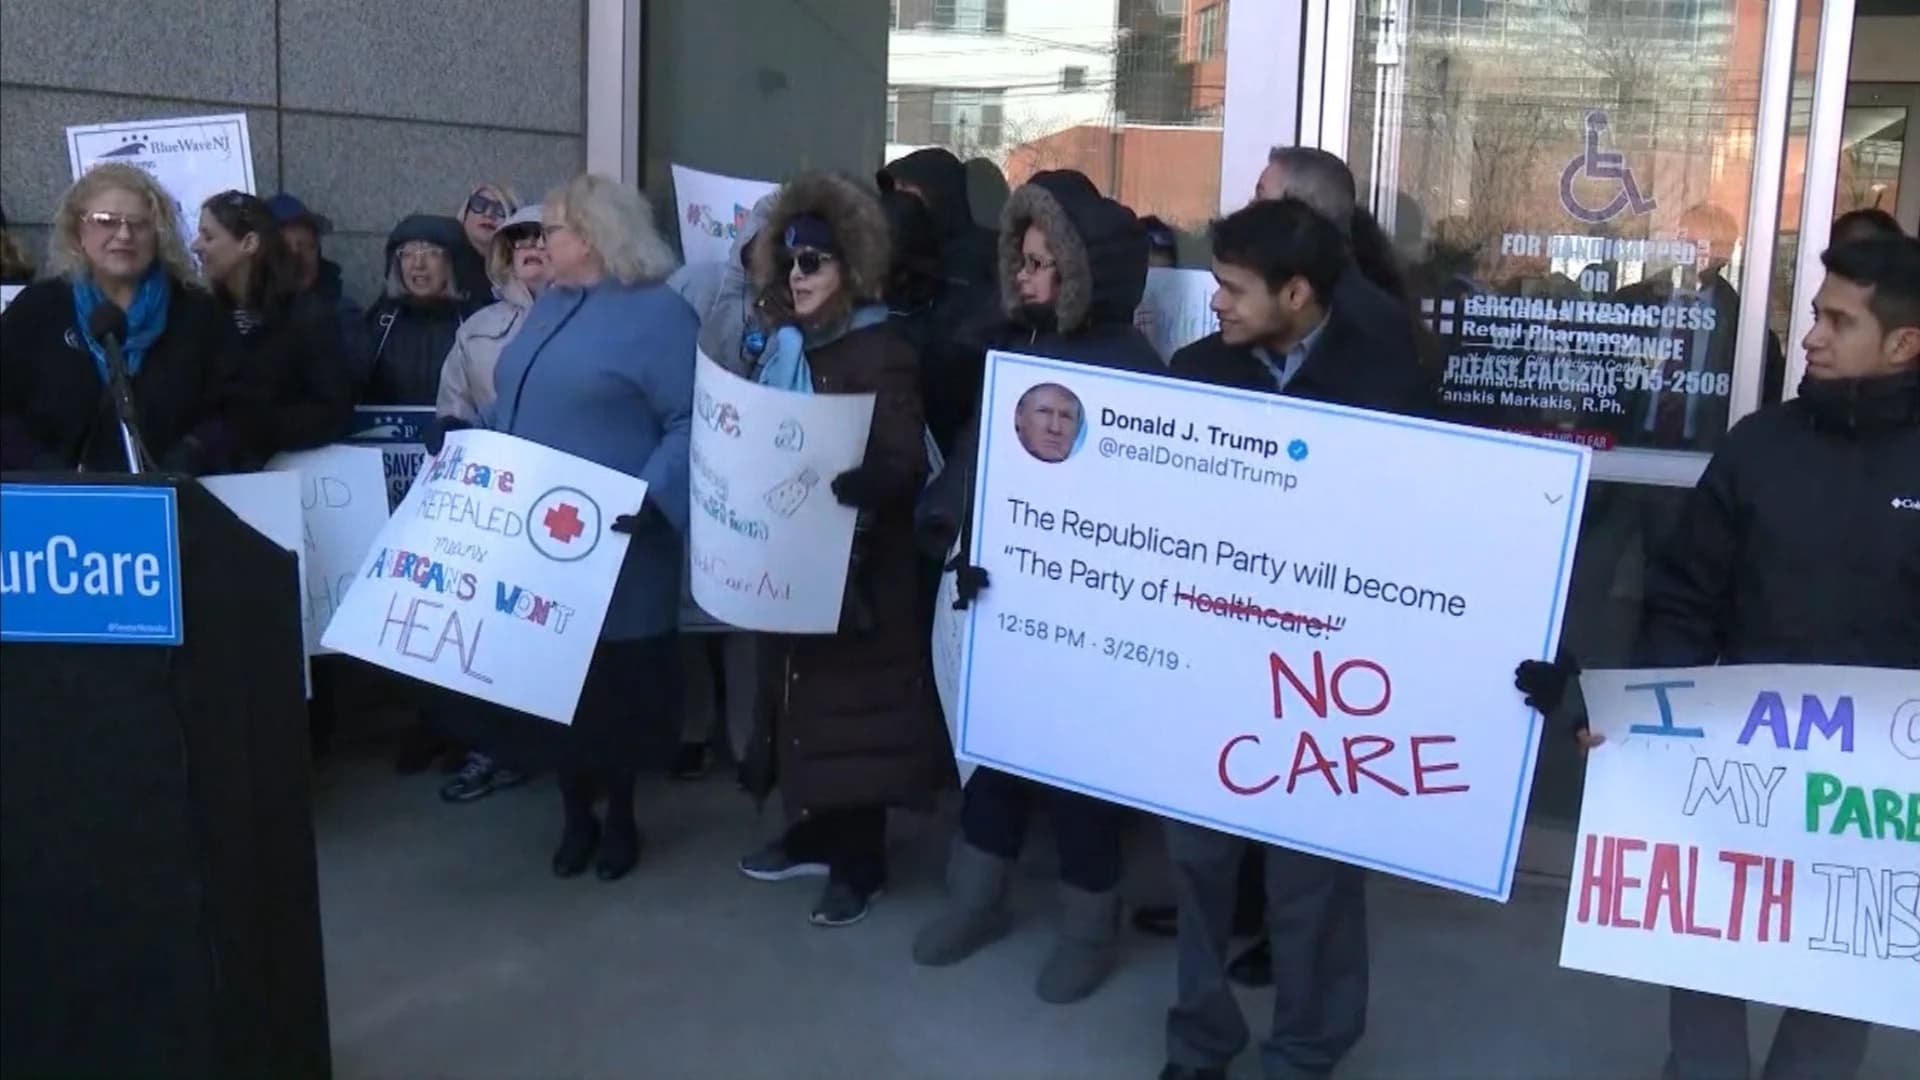 Demonstrators hold rally calling for preservation of Affordable Care Act